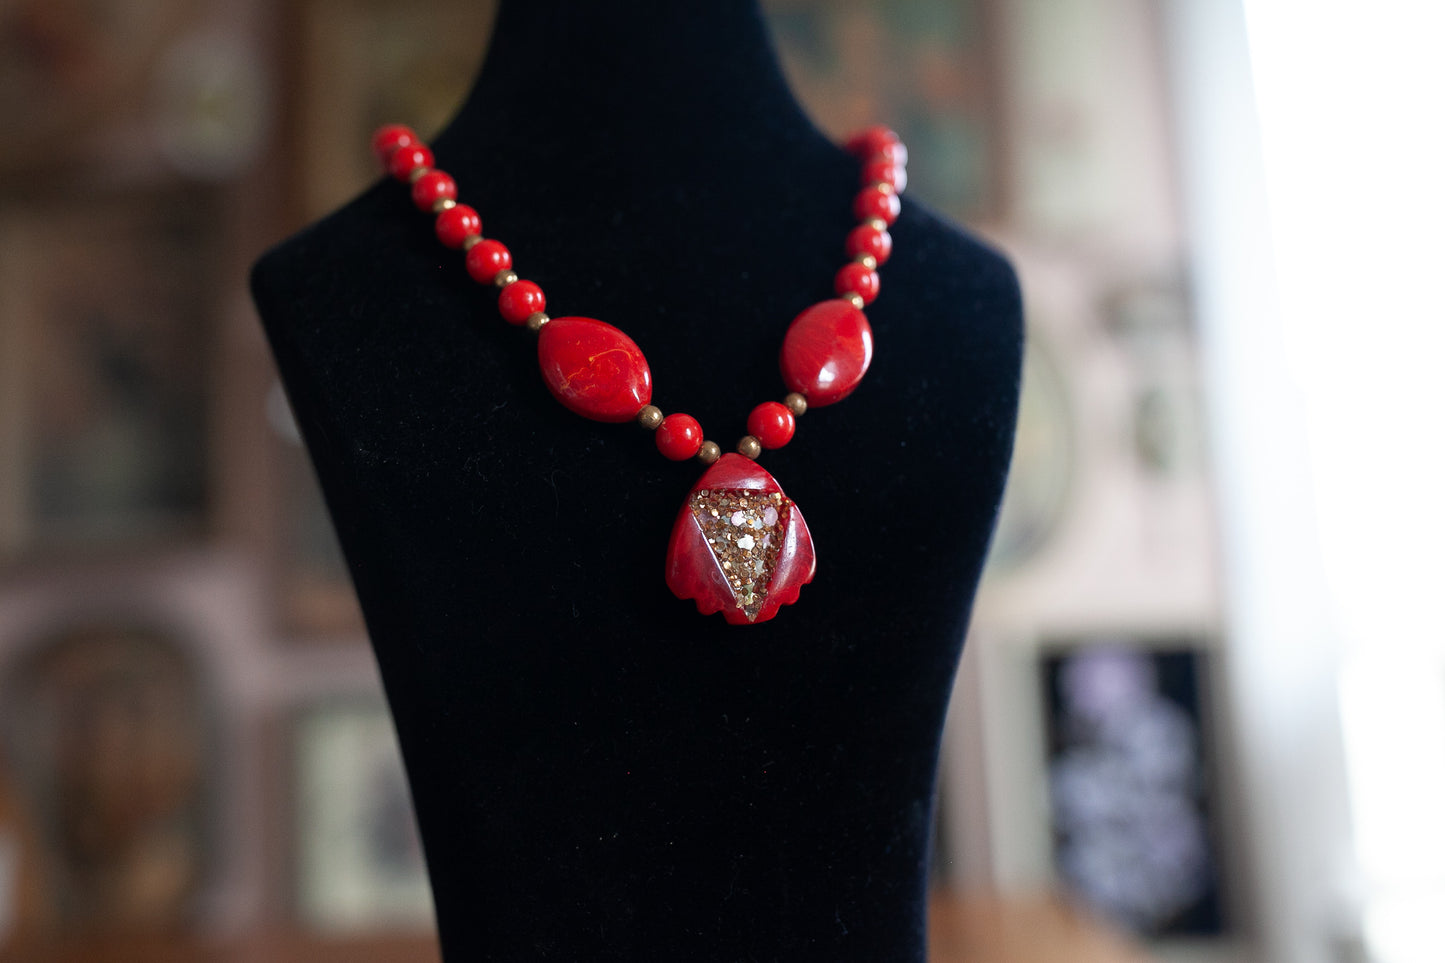 Vintage Costume Jewelry - Red Beaded Necklace